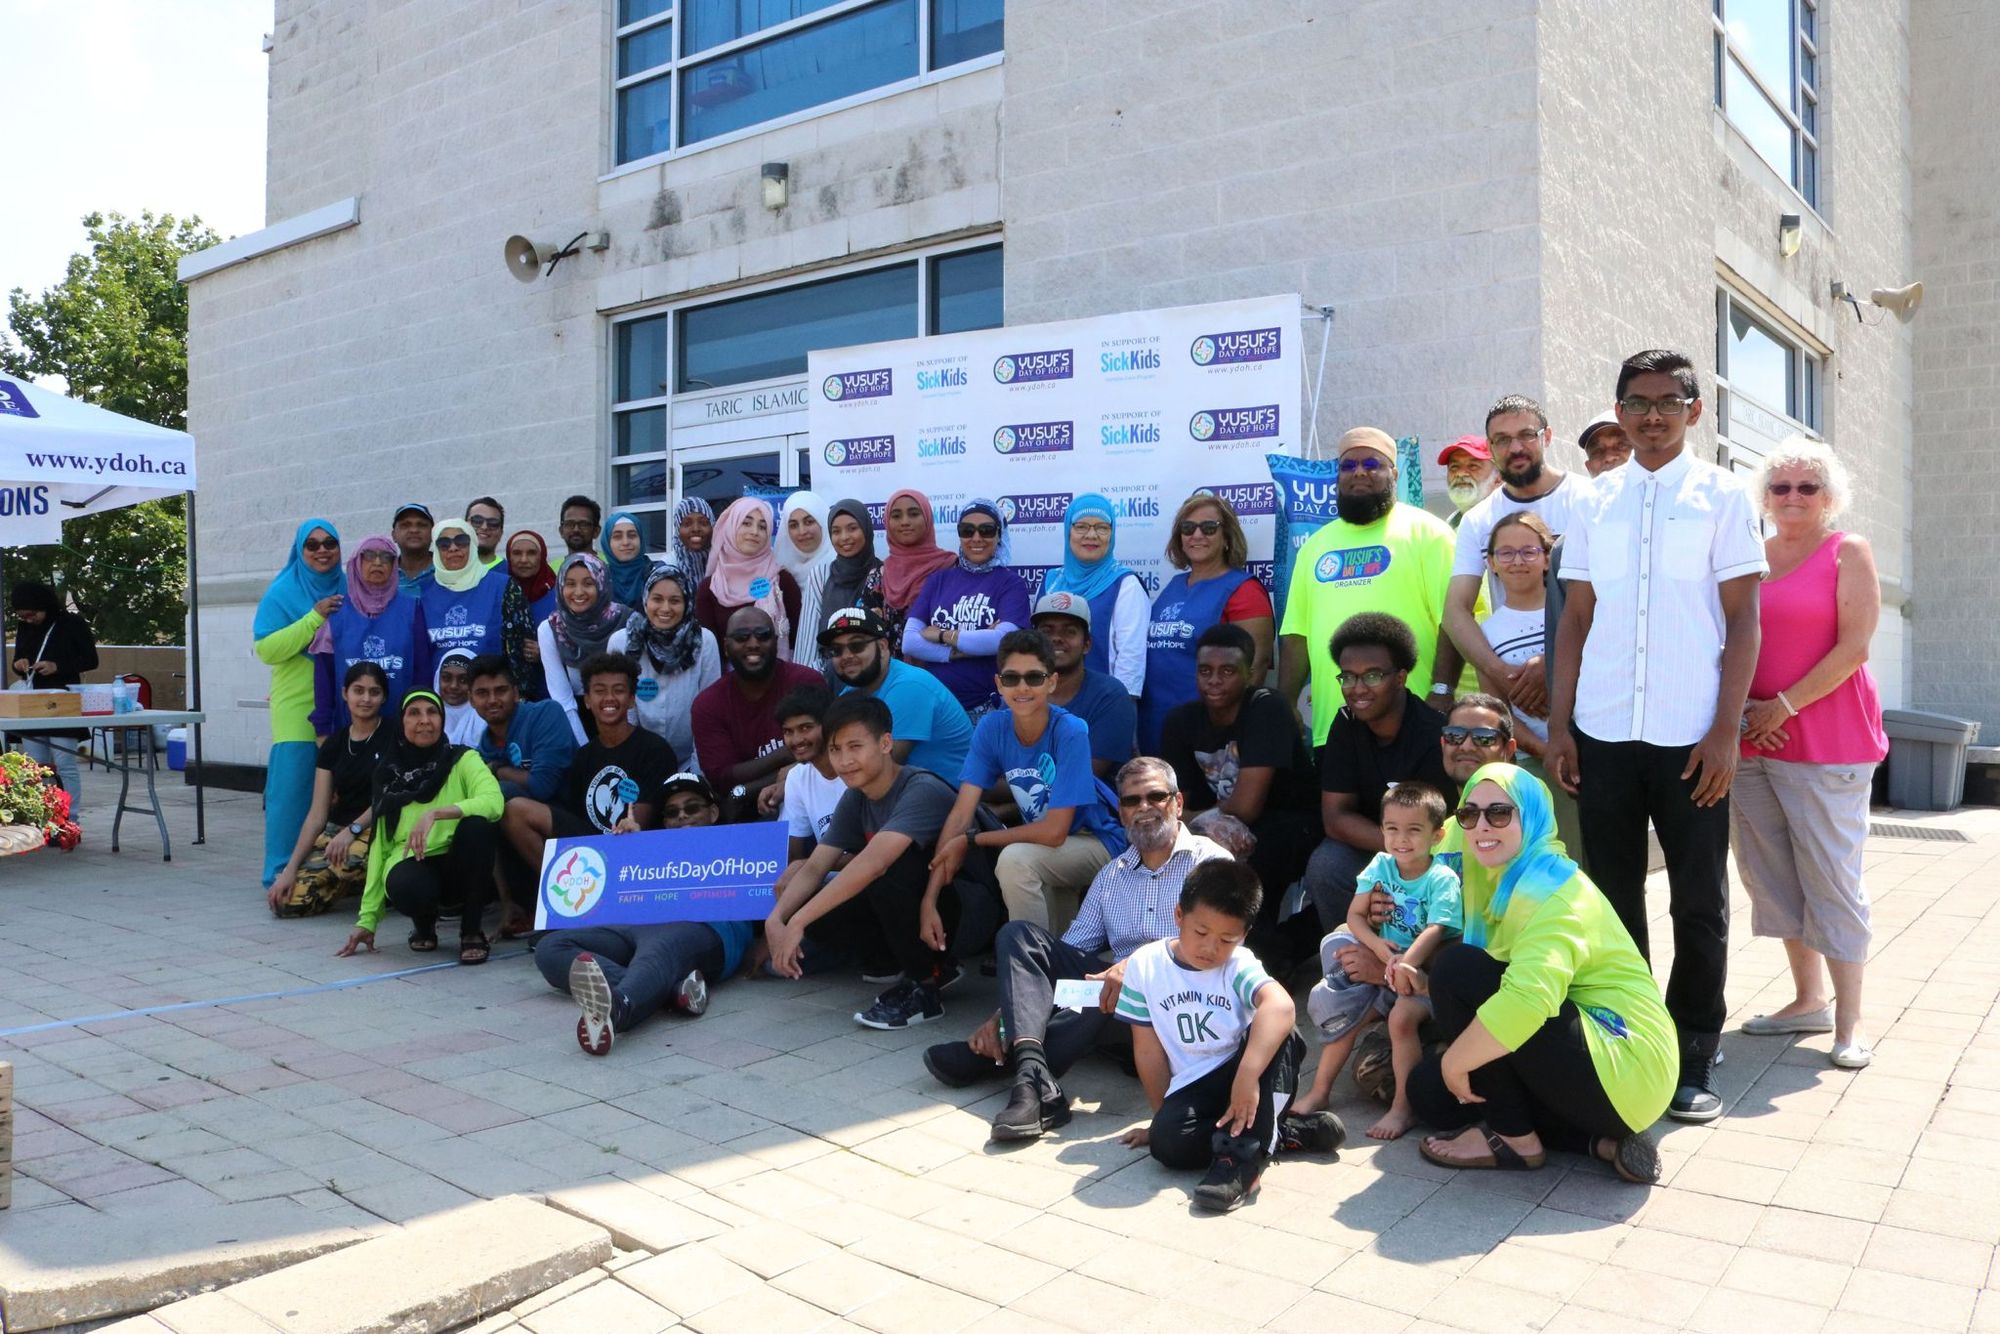 Yusuf's Day of Hope 2023: Spreading Hope and Support for the Community